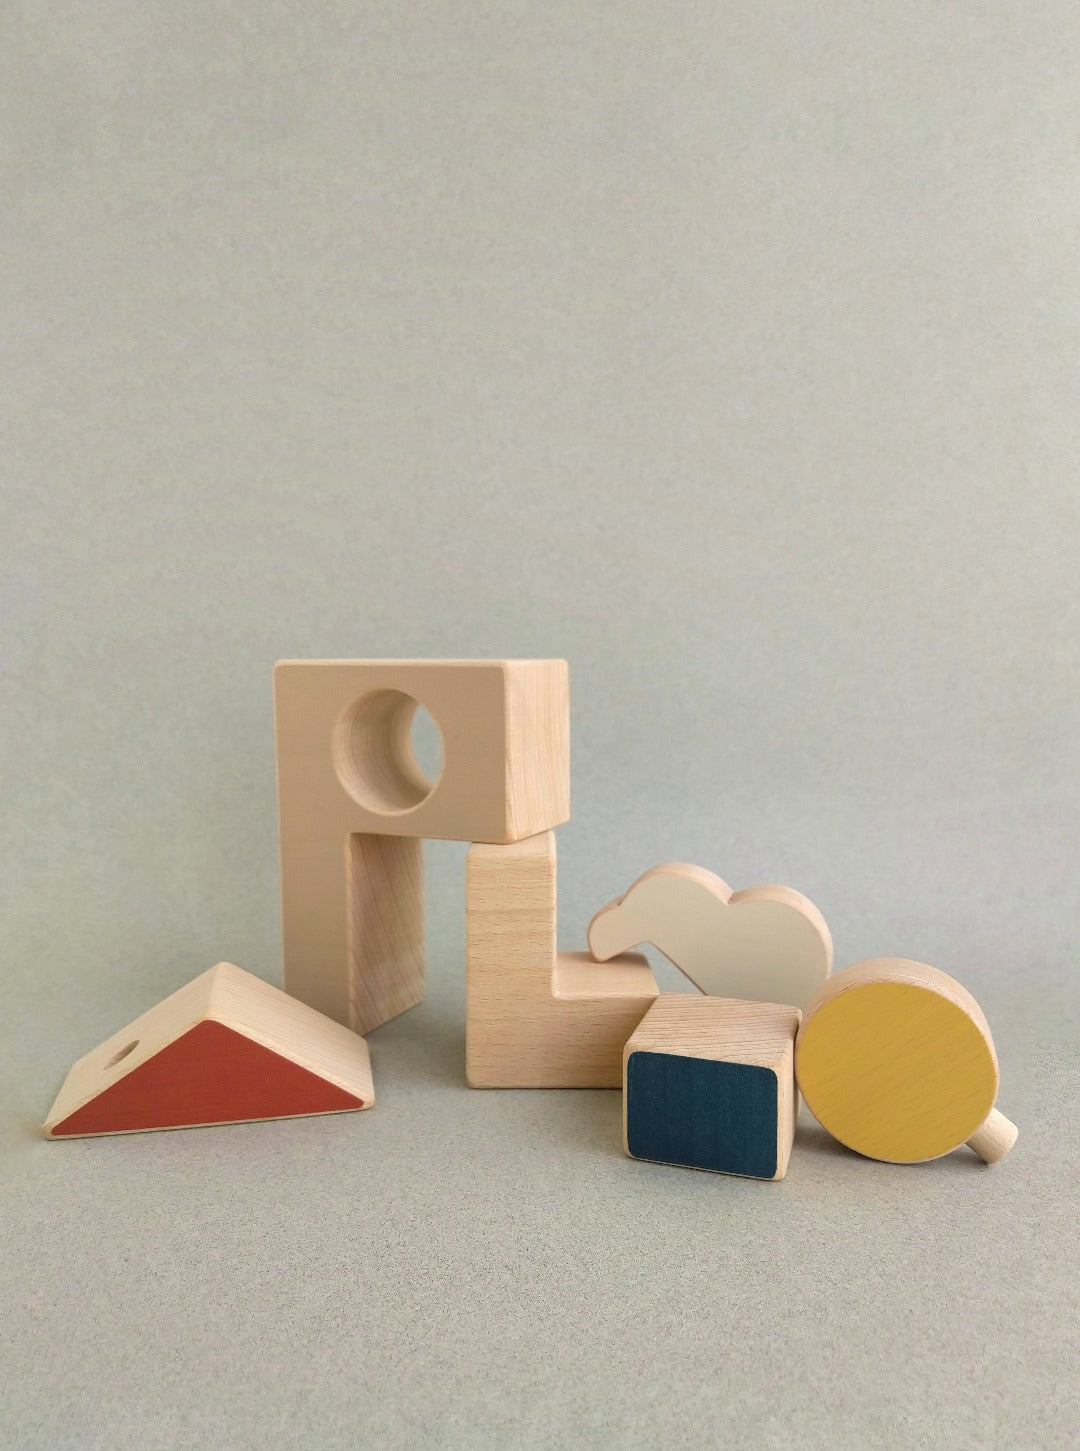 This wooden toy puzzle house combines geometries, vivid colors and satin smooth natural wood surfaces.